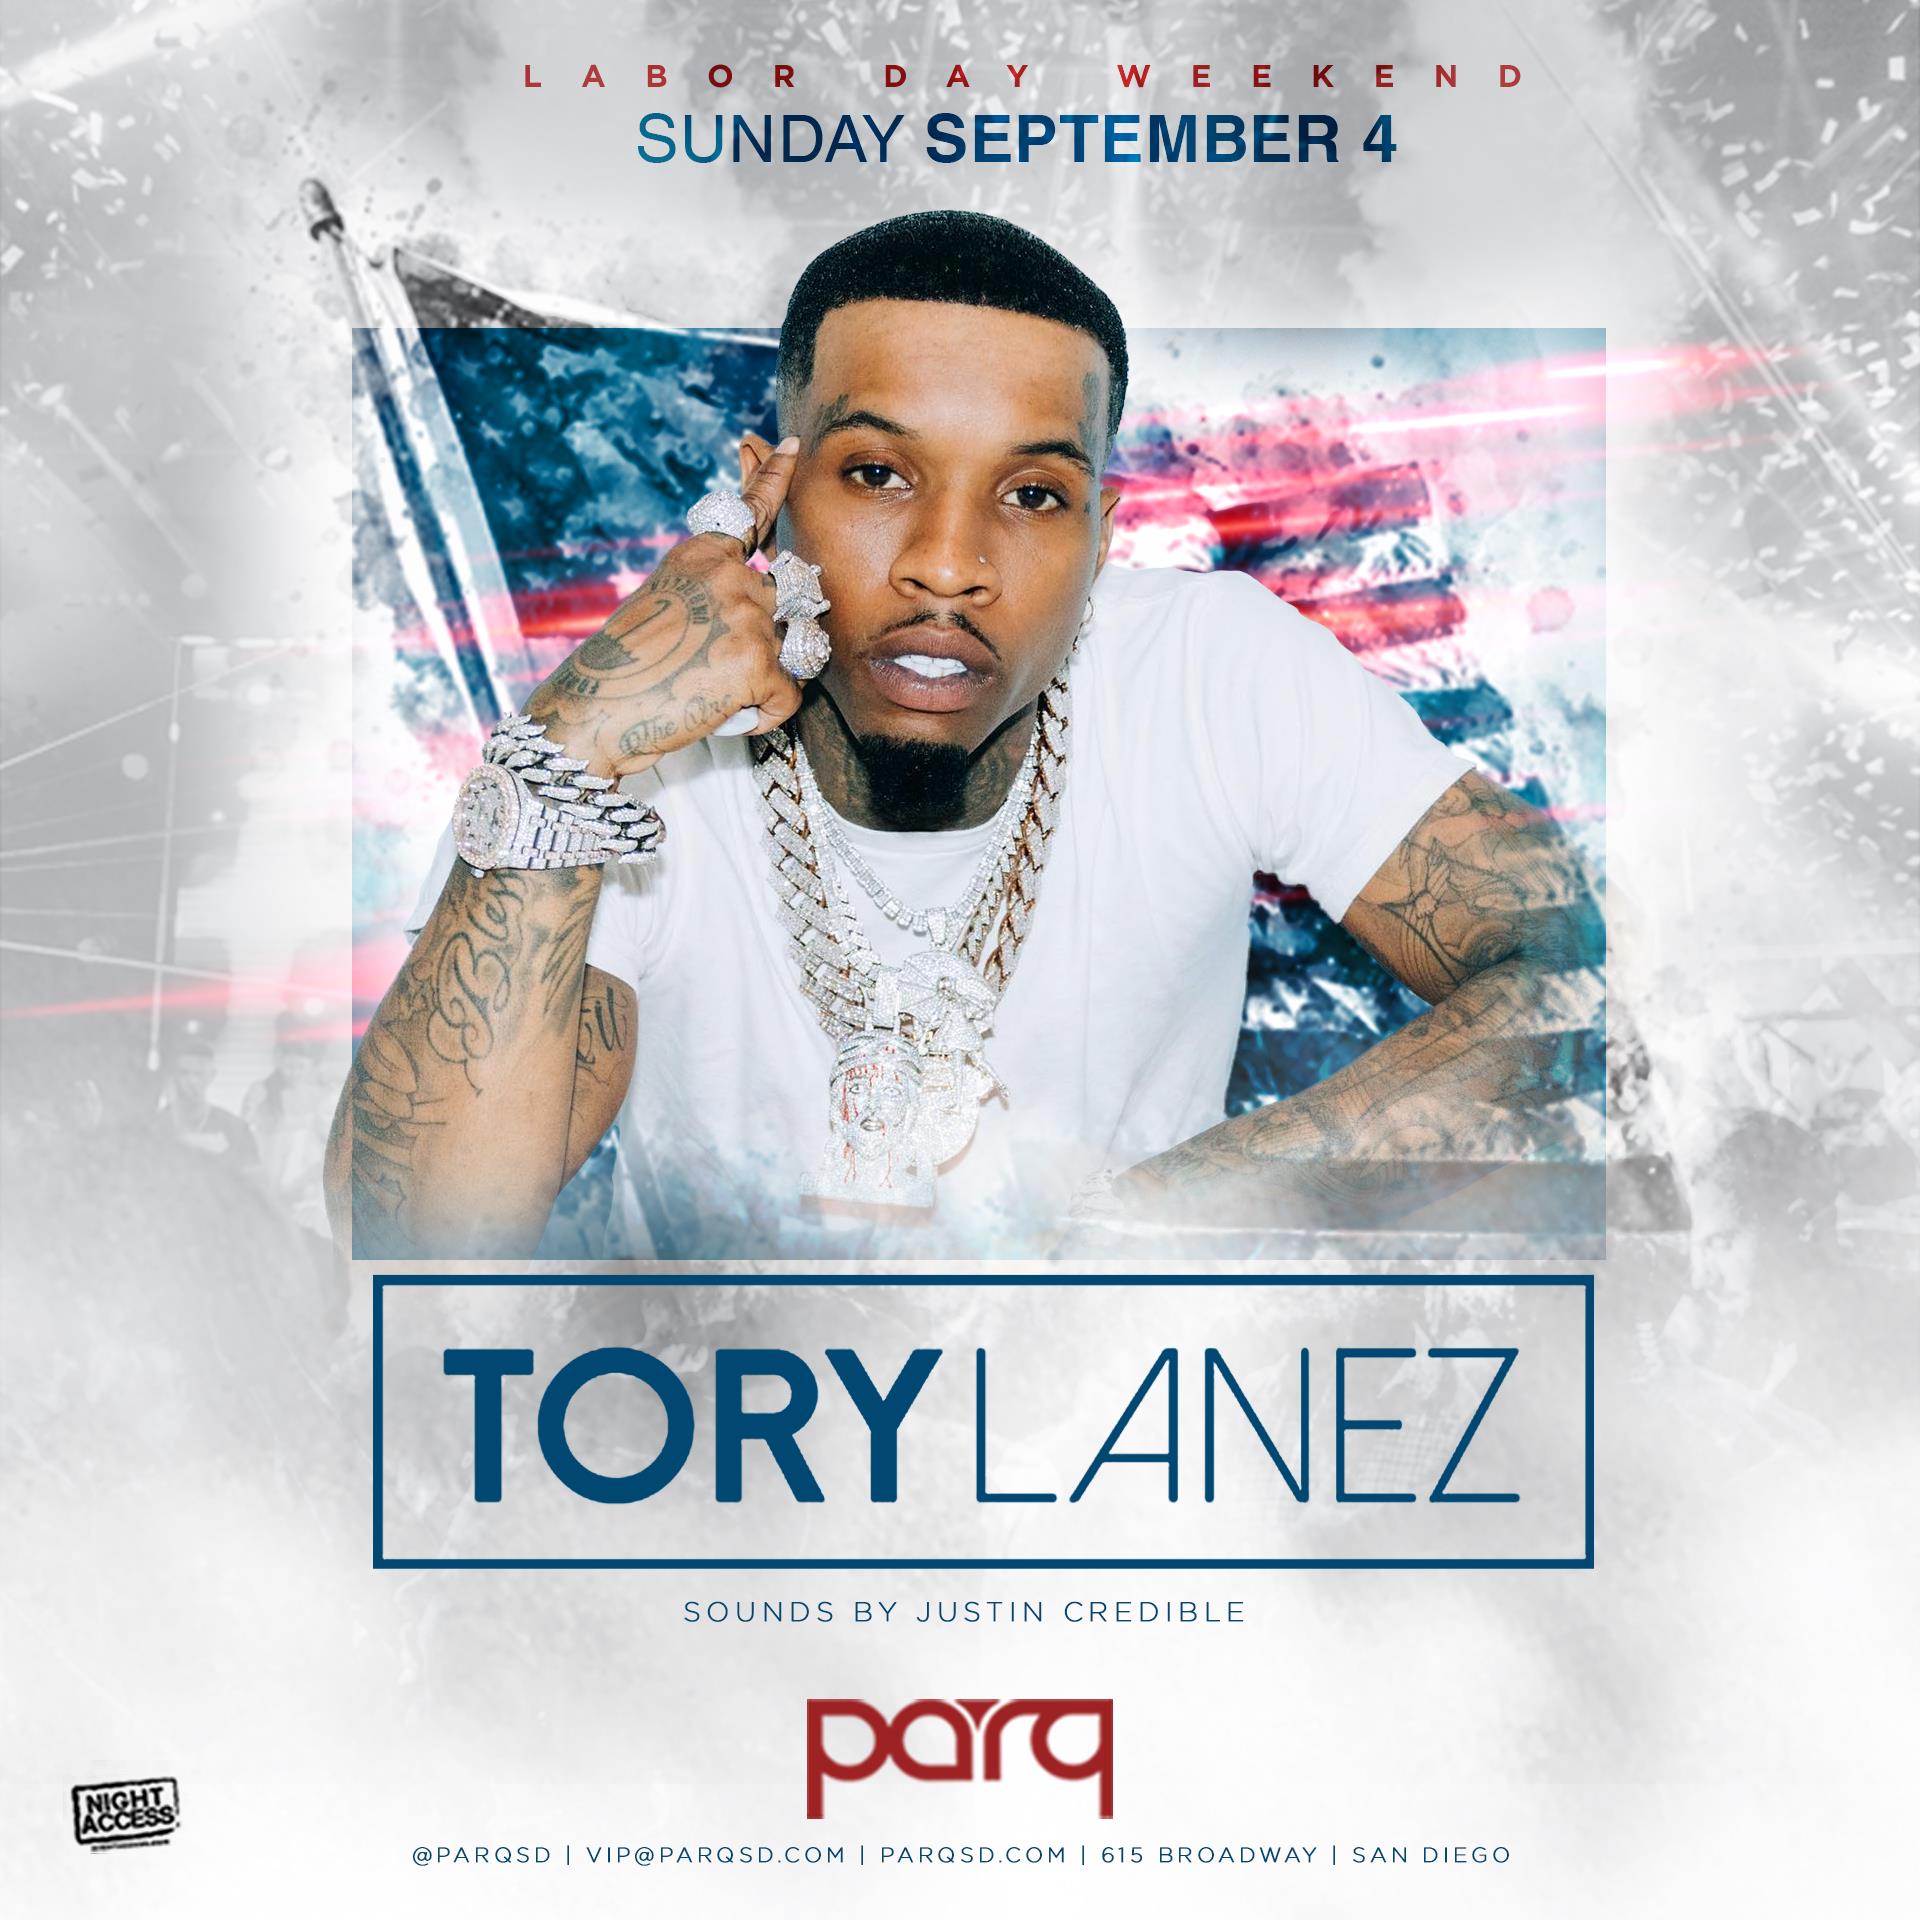 Buy Tickets to Tory Lanez in San Diego on Sep 04, 2022